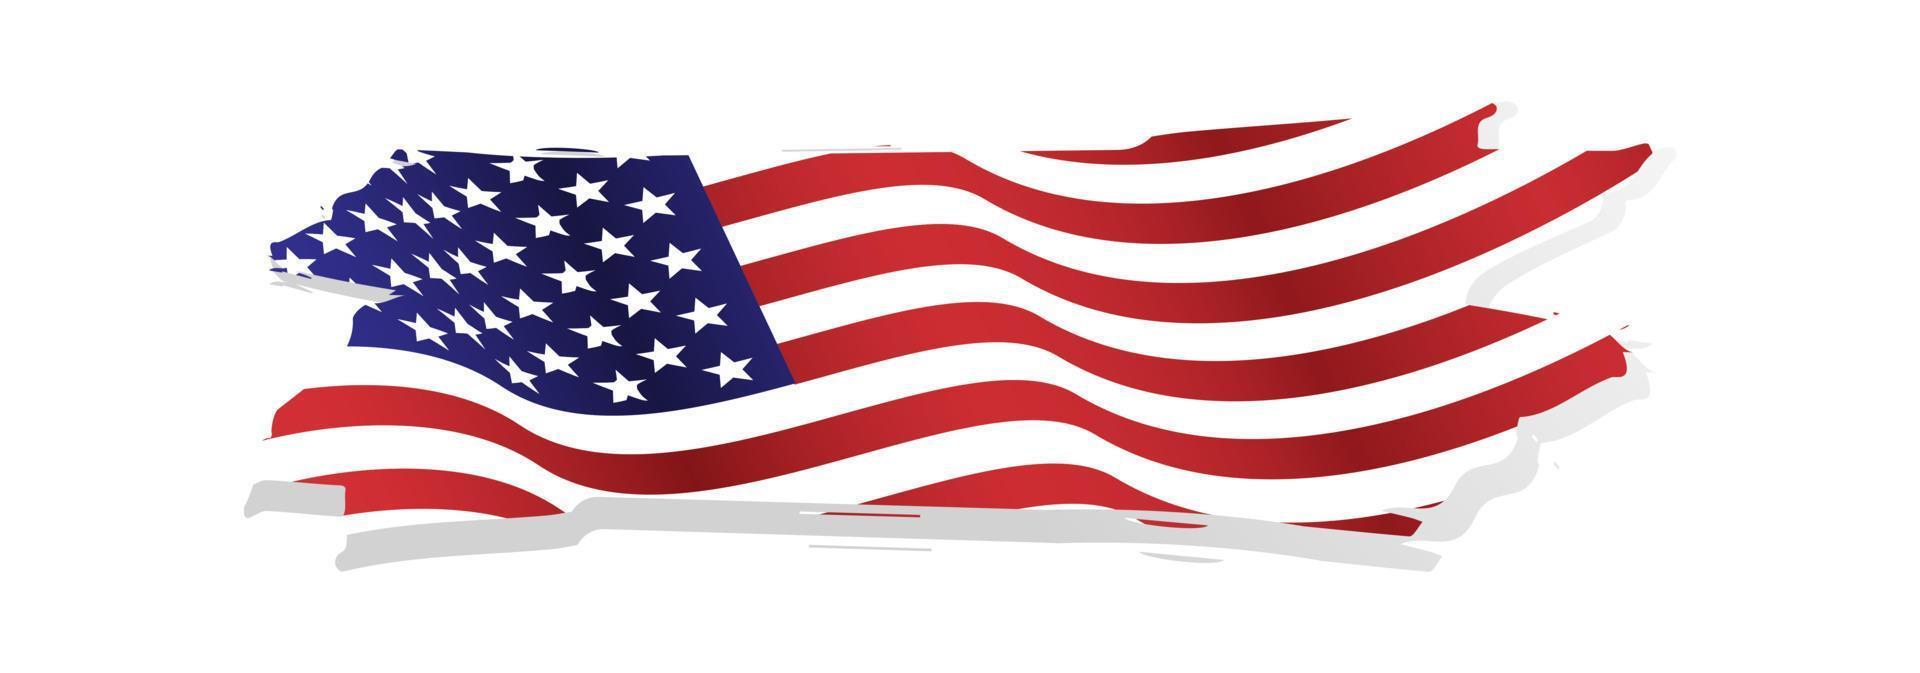 Grunge and torn waving american flag illustration vector for independence day 4th july